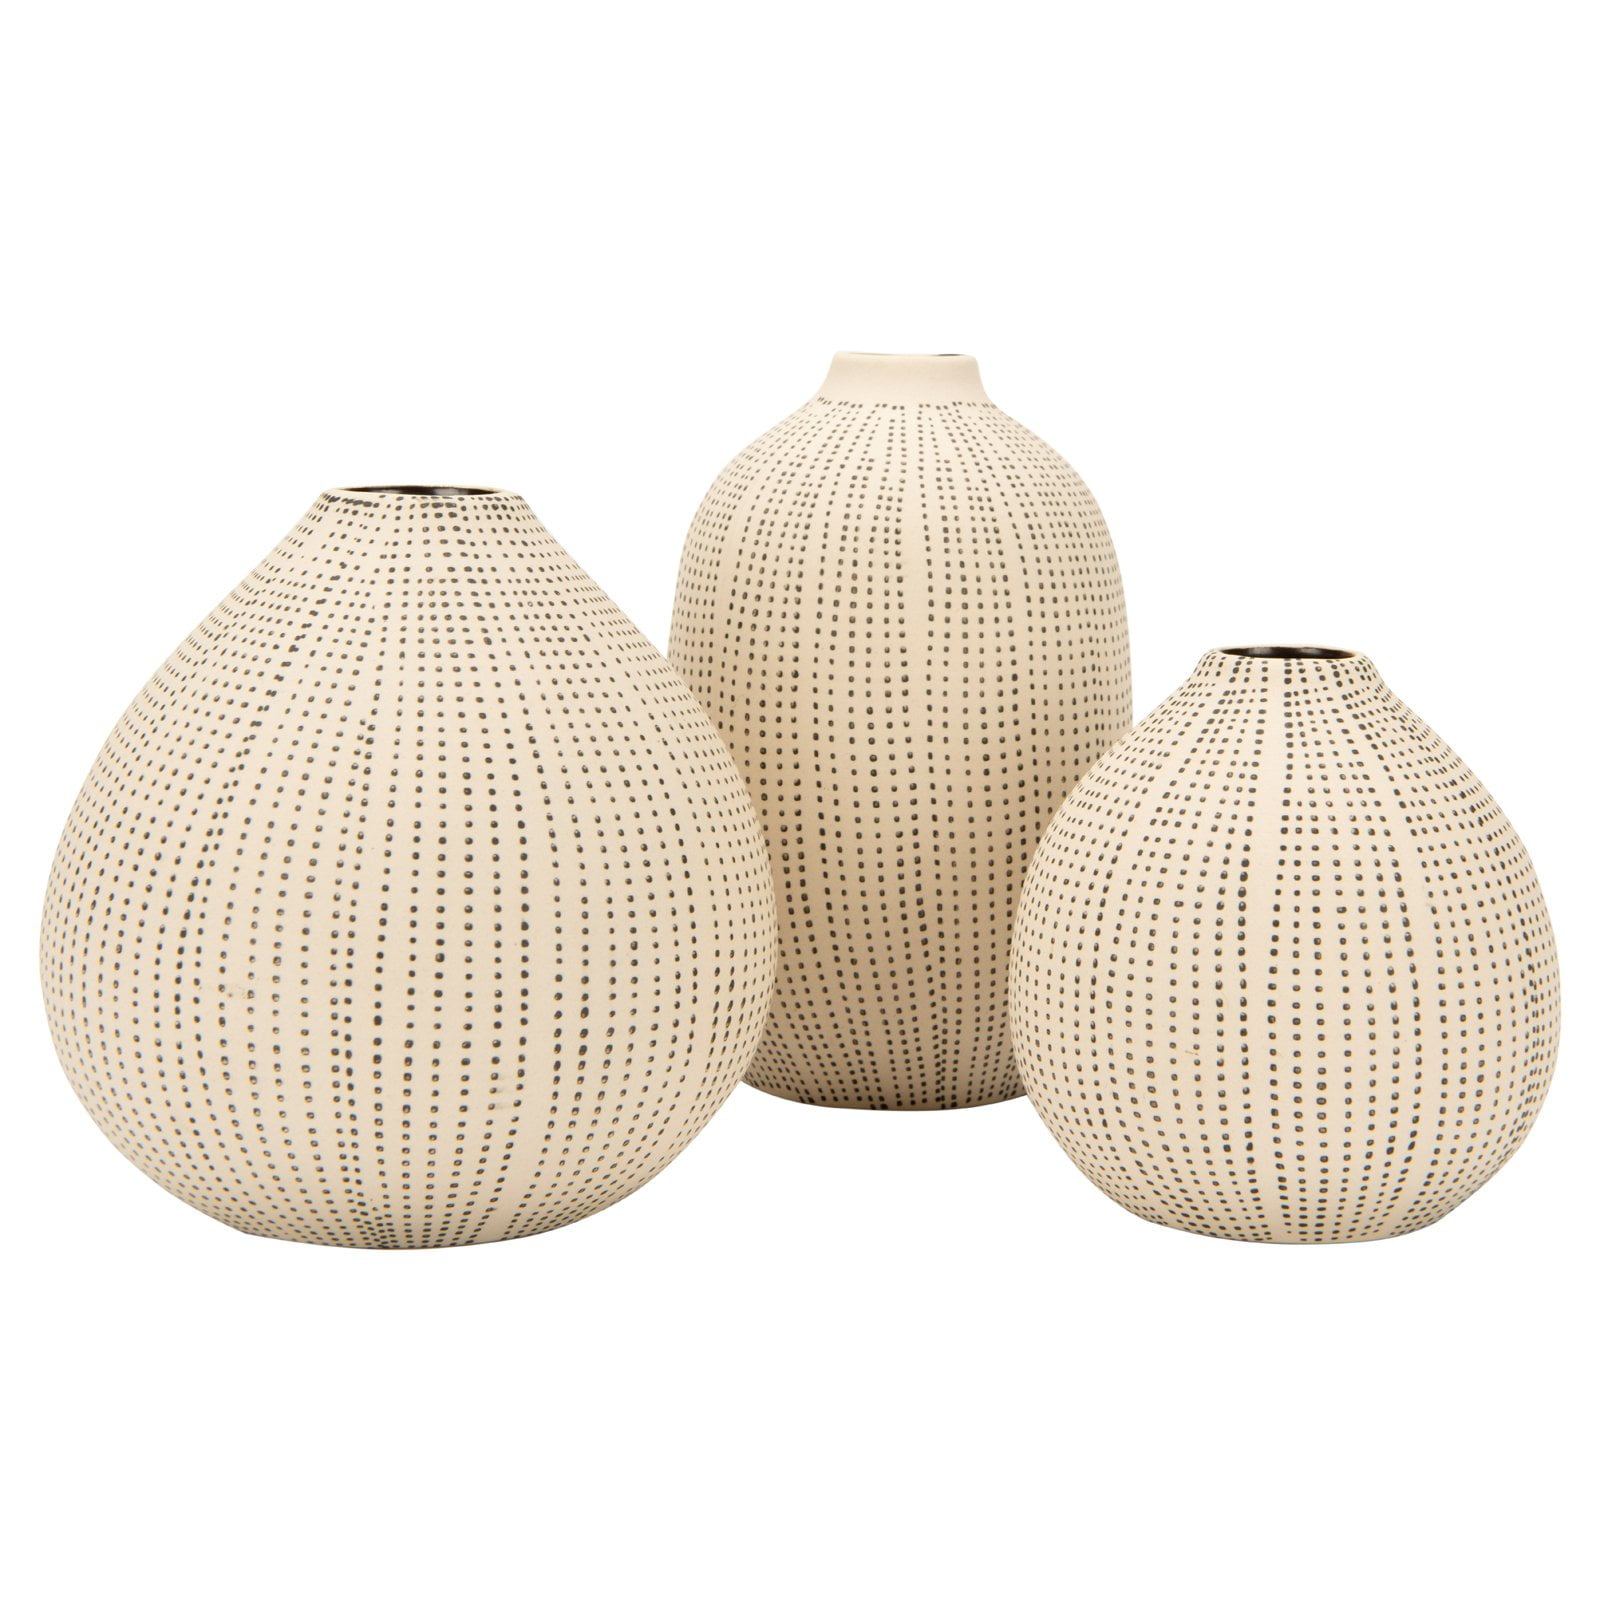 Shop 3R Studios White Stoneware Vases with Textured Black Polka Dots - Set of 3 from Walmart on Openhaus